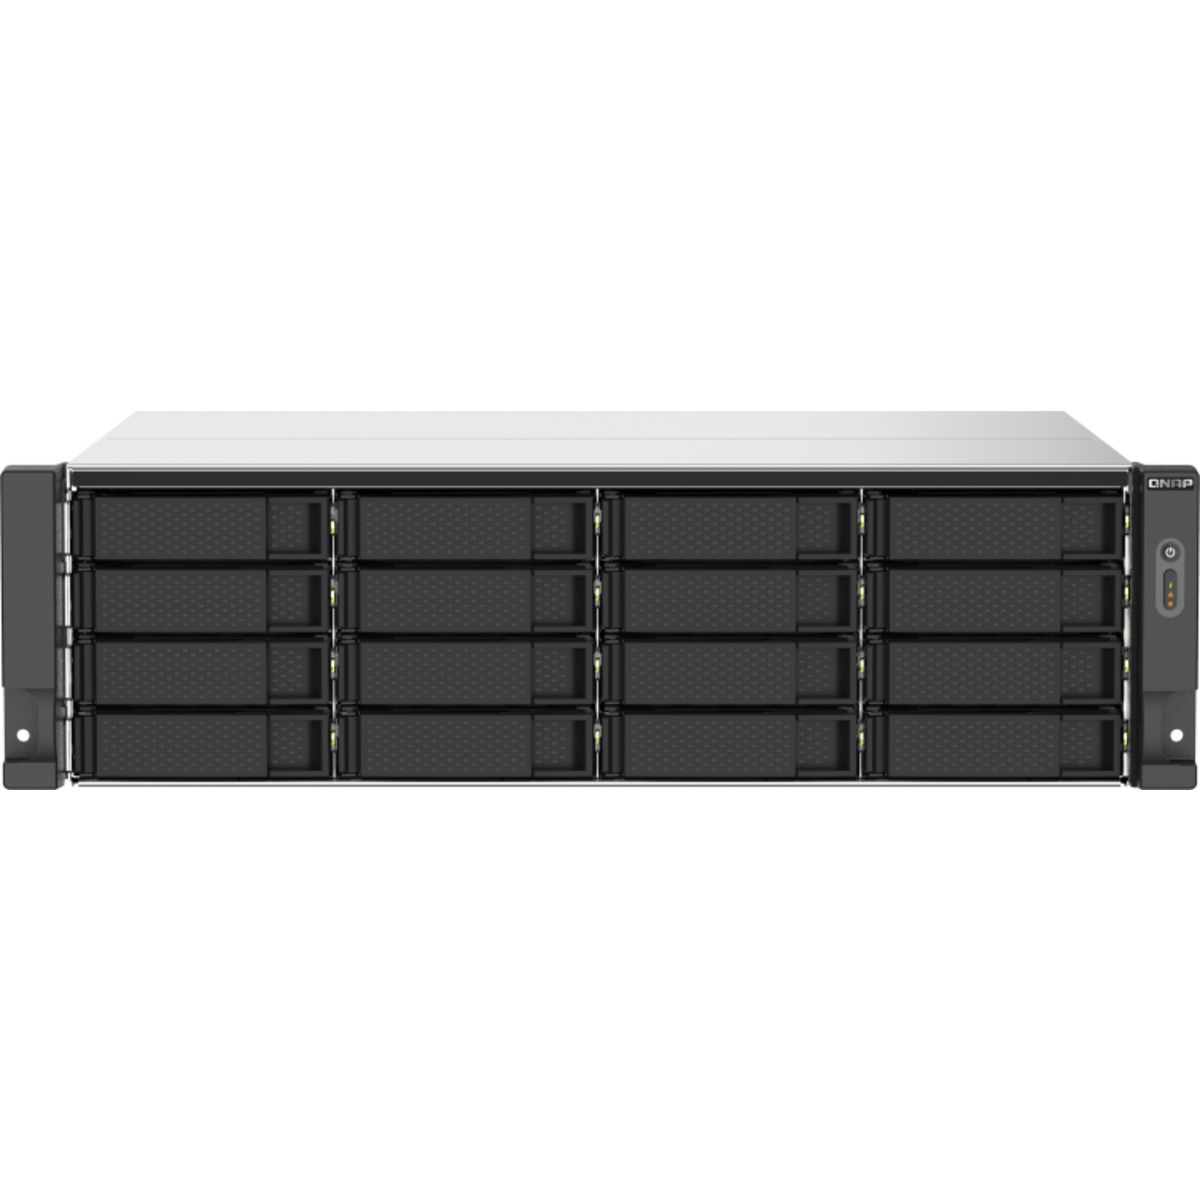 QNAP TS-1673AU-RP 156tb 16-Bay RackMount Multimedia / Power User / Business NAS - Network Attached Storage Device 13x12tb Western Digital Ultrastar DC HC520 HUH721212ALE600 3.5 7200rpm SATA 6Gb/s HDD ENTERPRISE Class Drives Installed - Burn-In Tested - FREE RAM UPGRADE TS-1673AU-RP